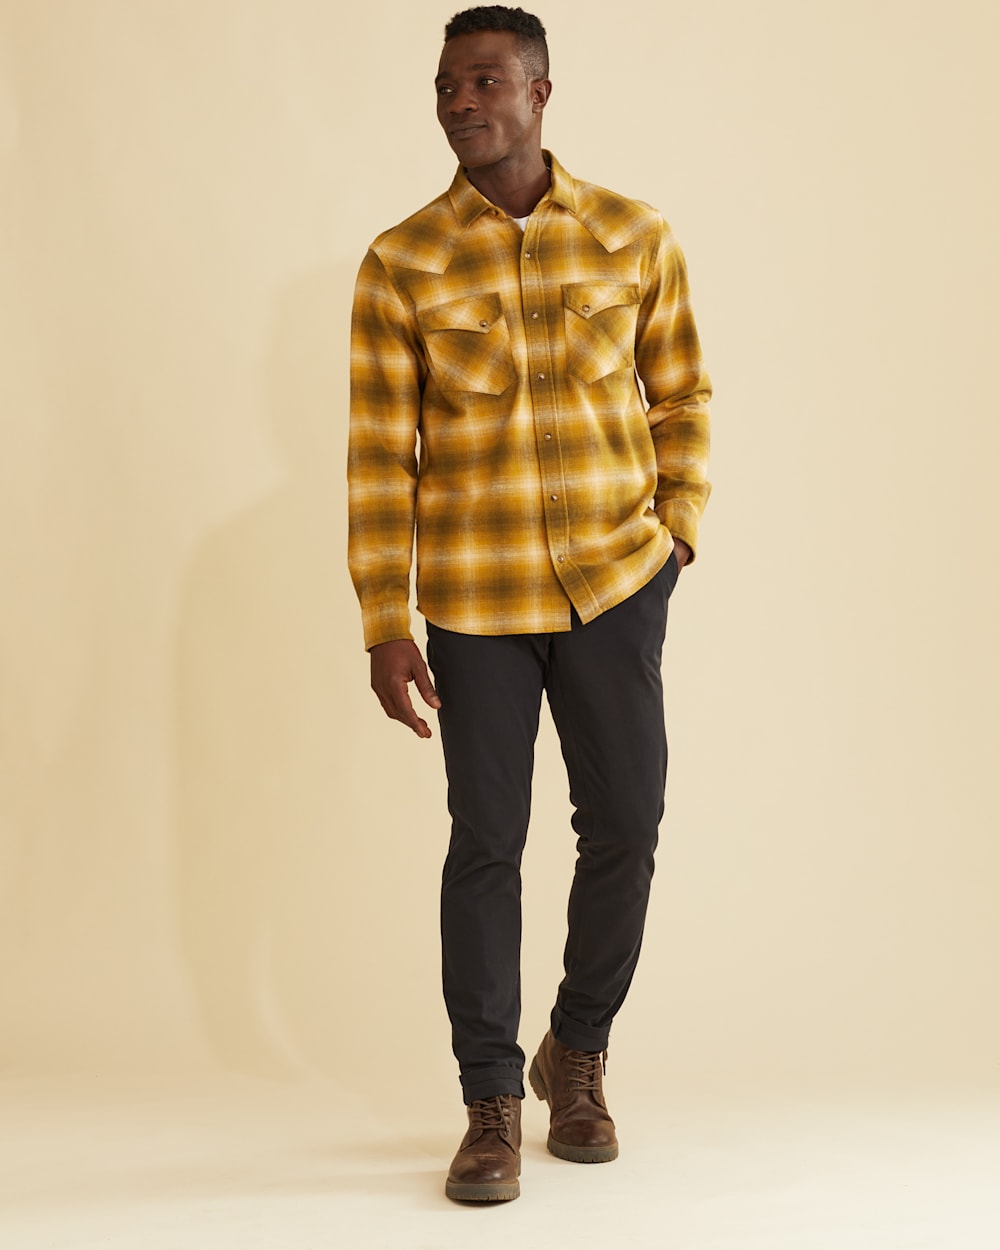 ALTERNATE VIEW OF MEN'S WYATT SNAP-FRONT COTTON SHIRT IN OLIVE/GOLD OMBRE image number 5